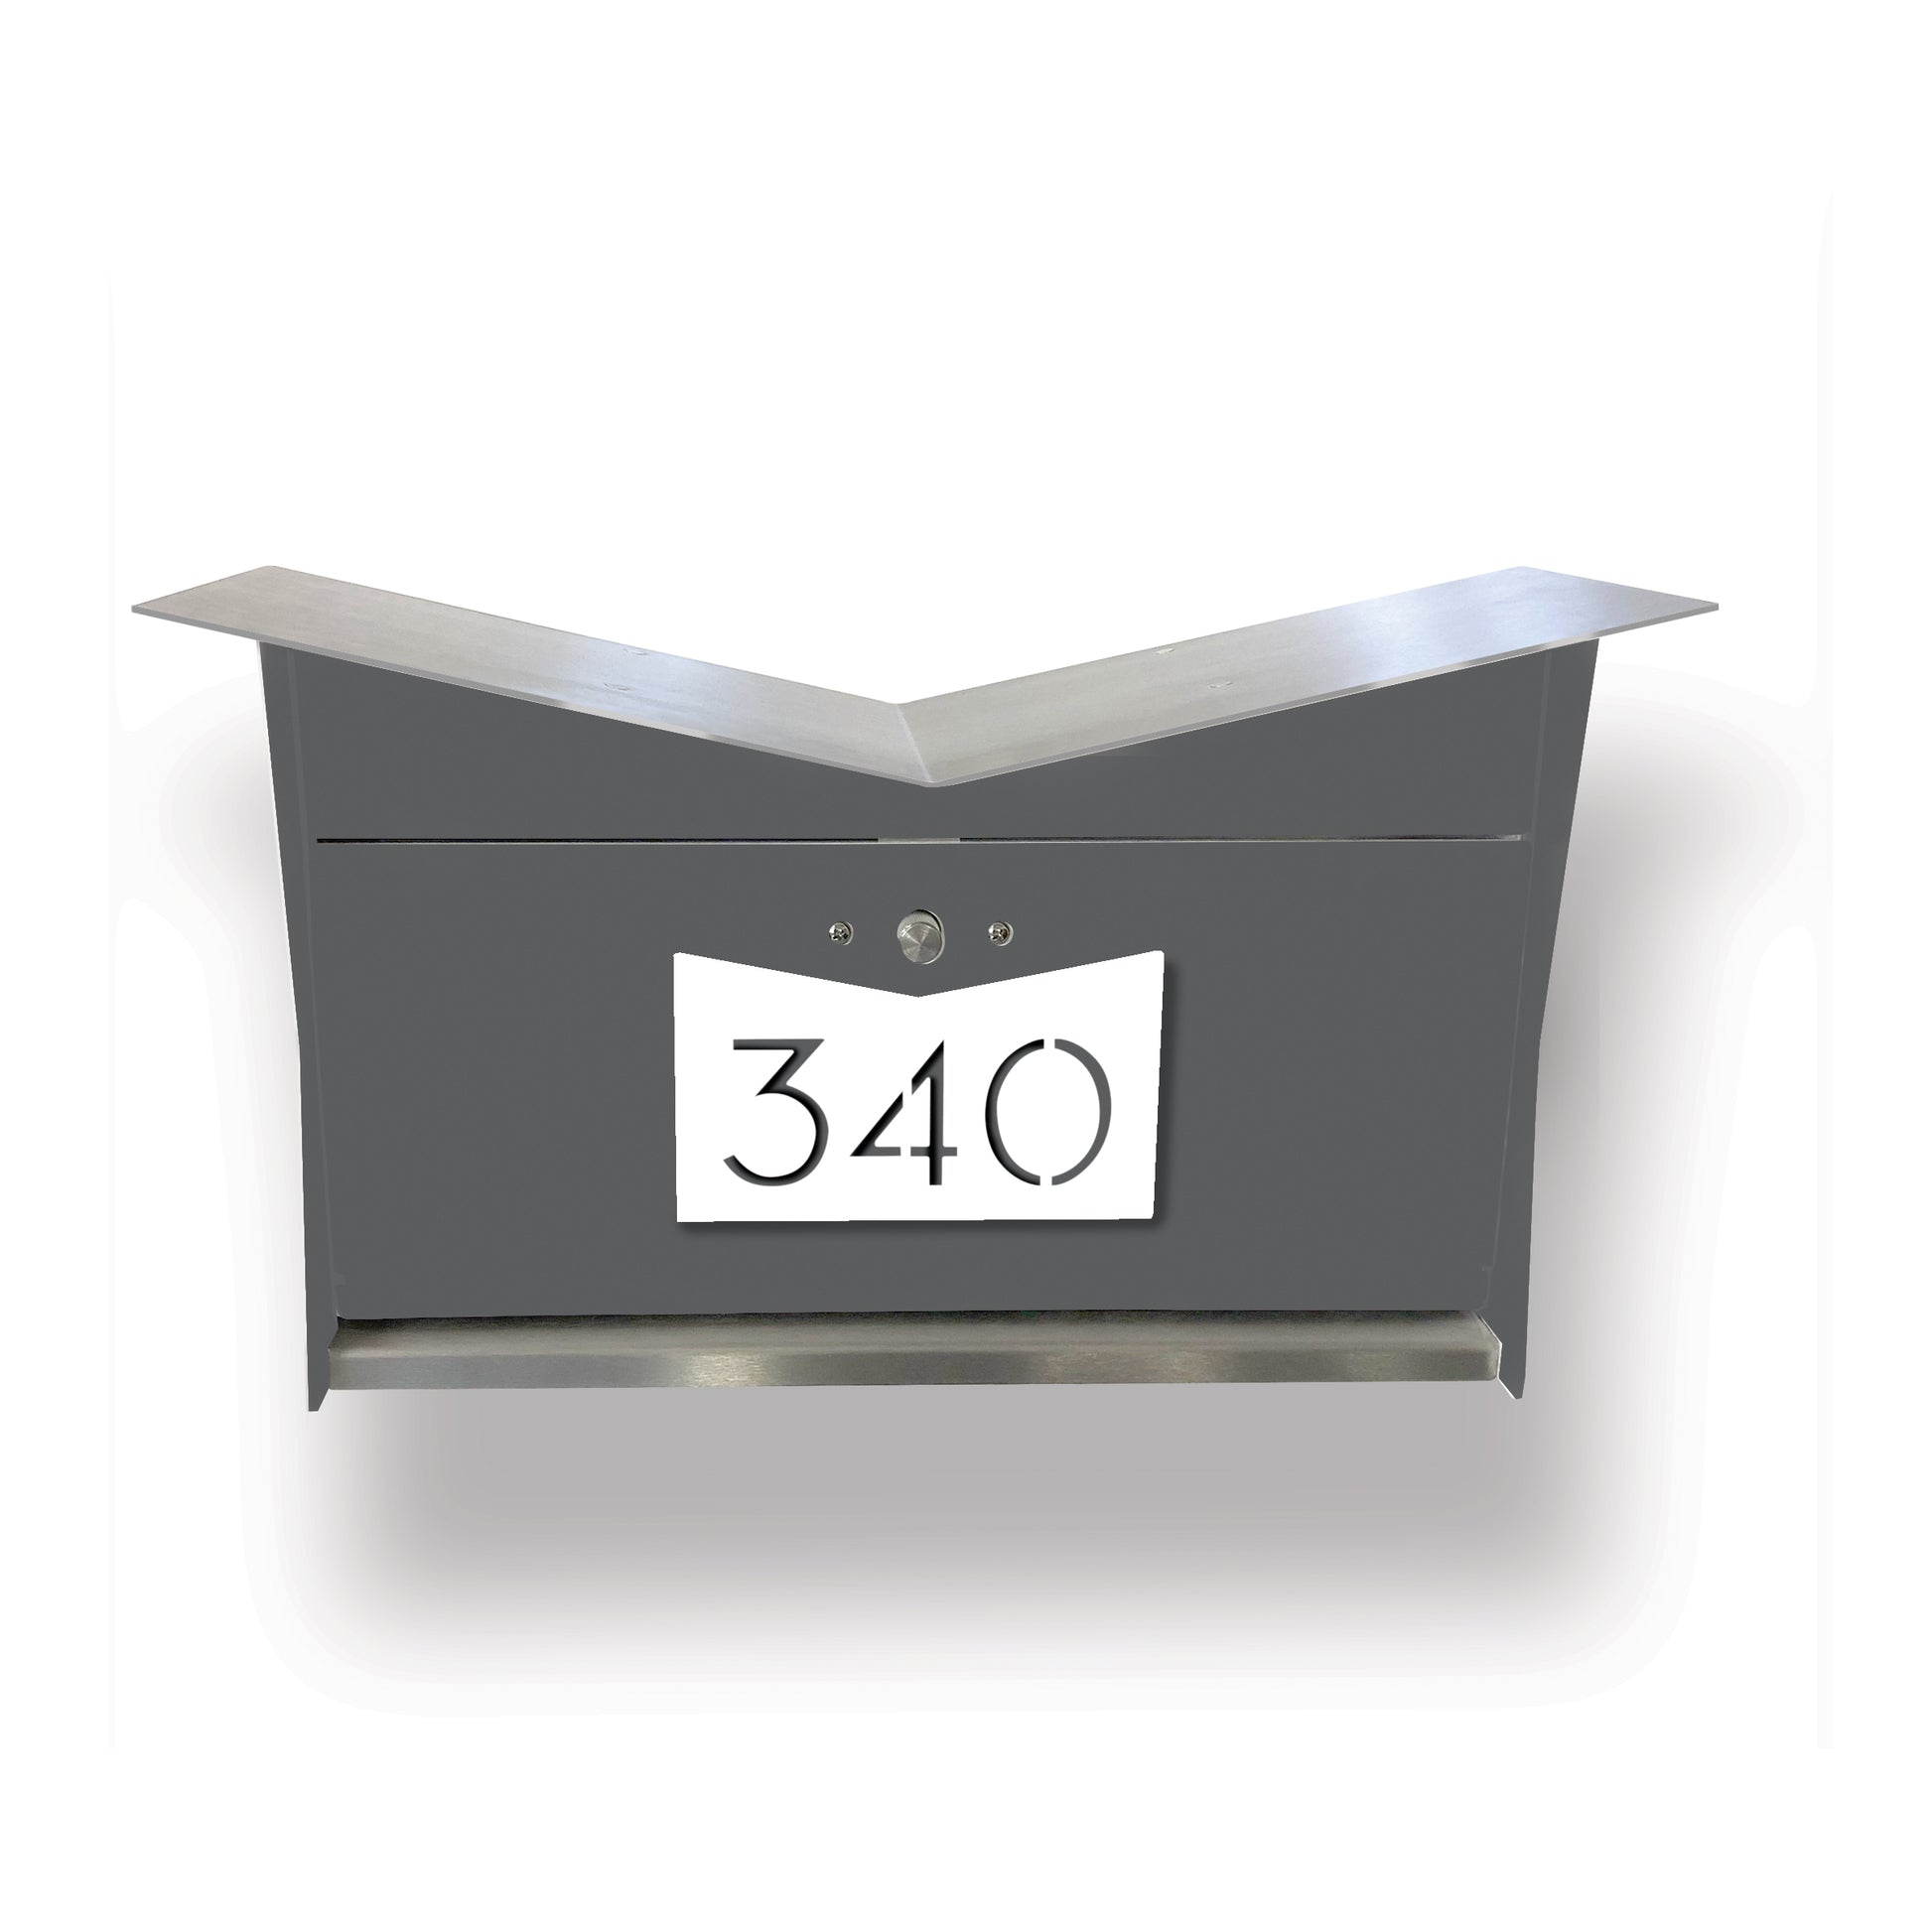 Wall Mount Mailbox | ButterFly Box in designer gray and white